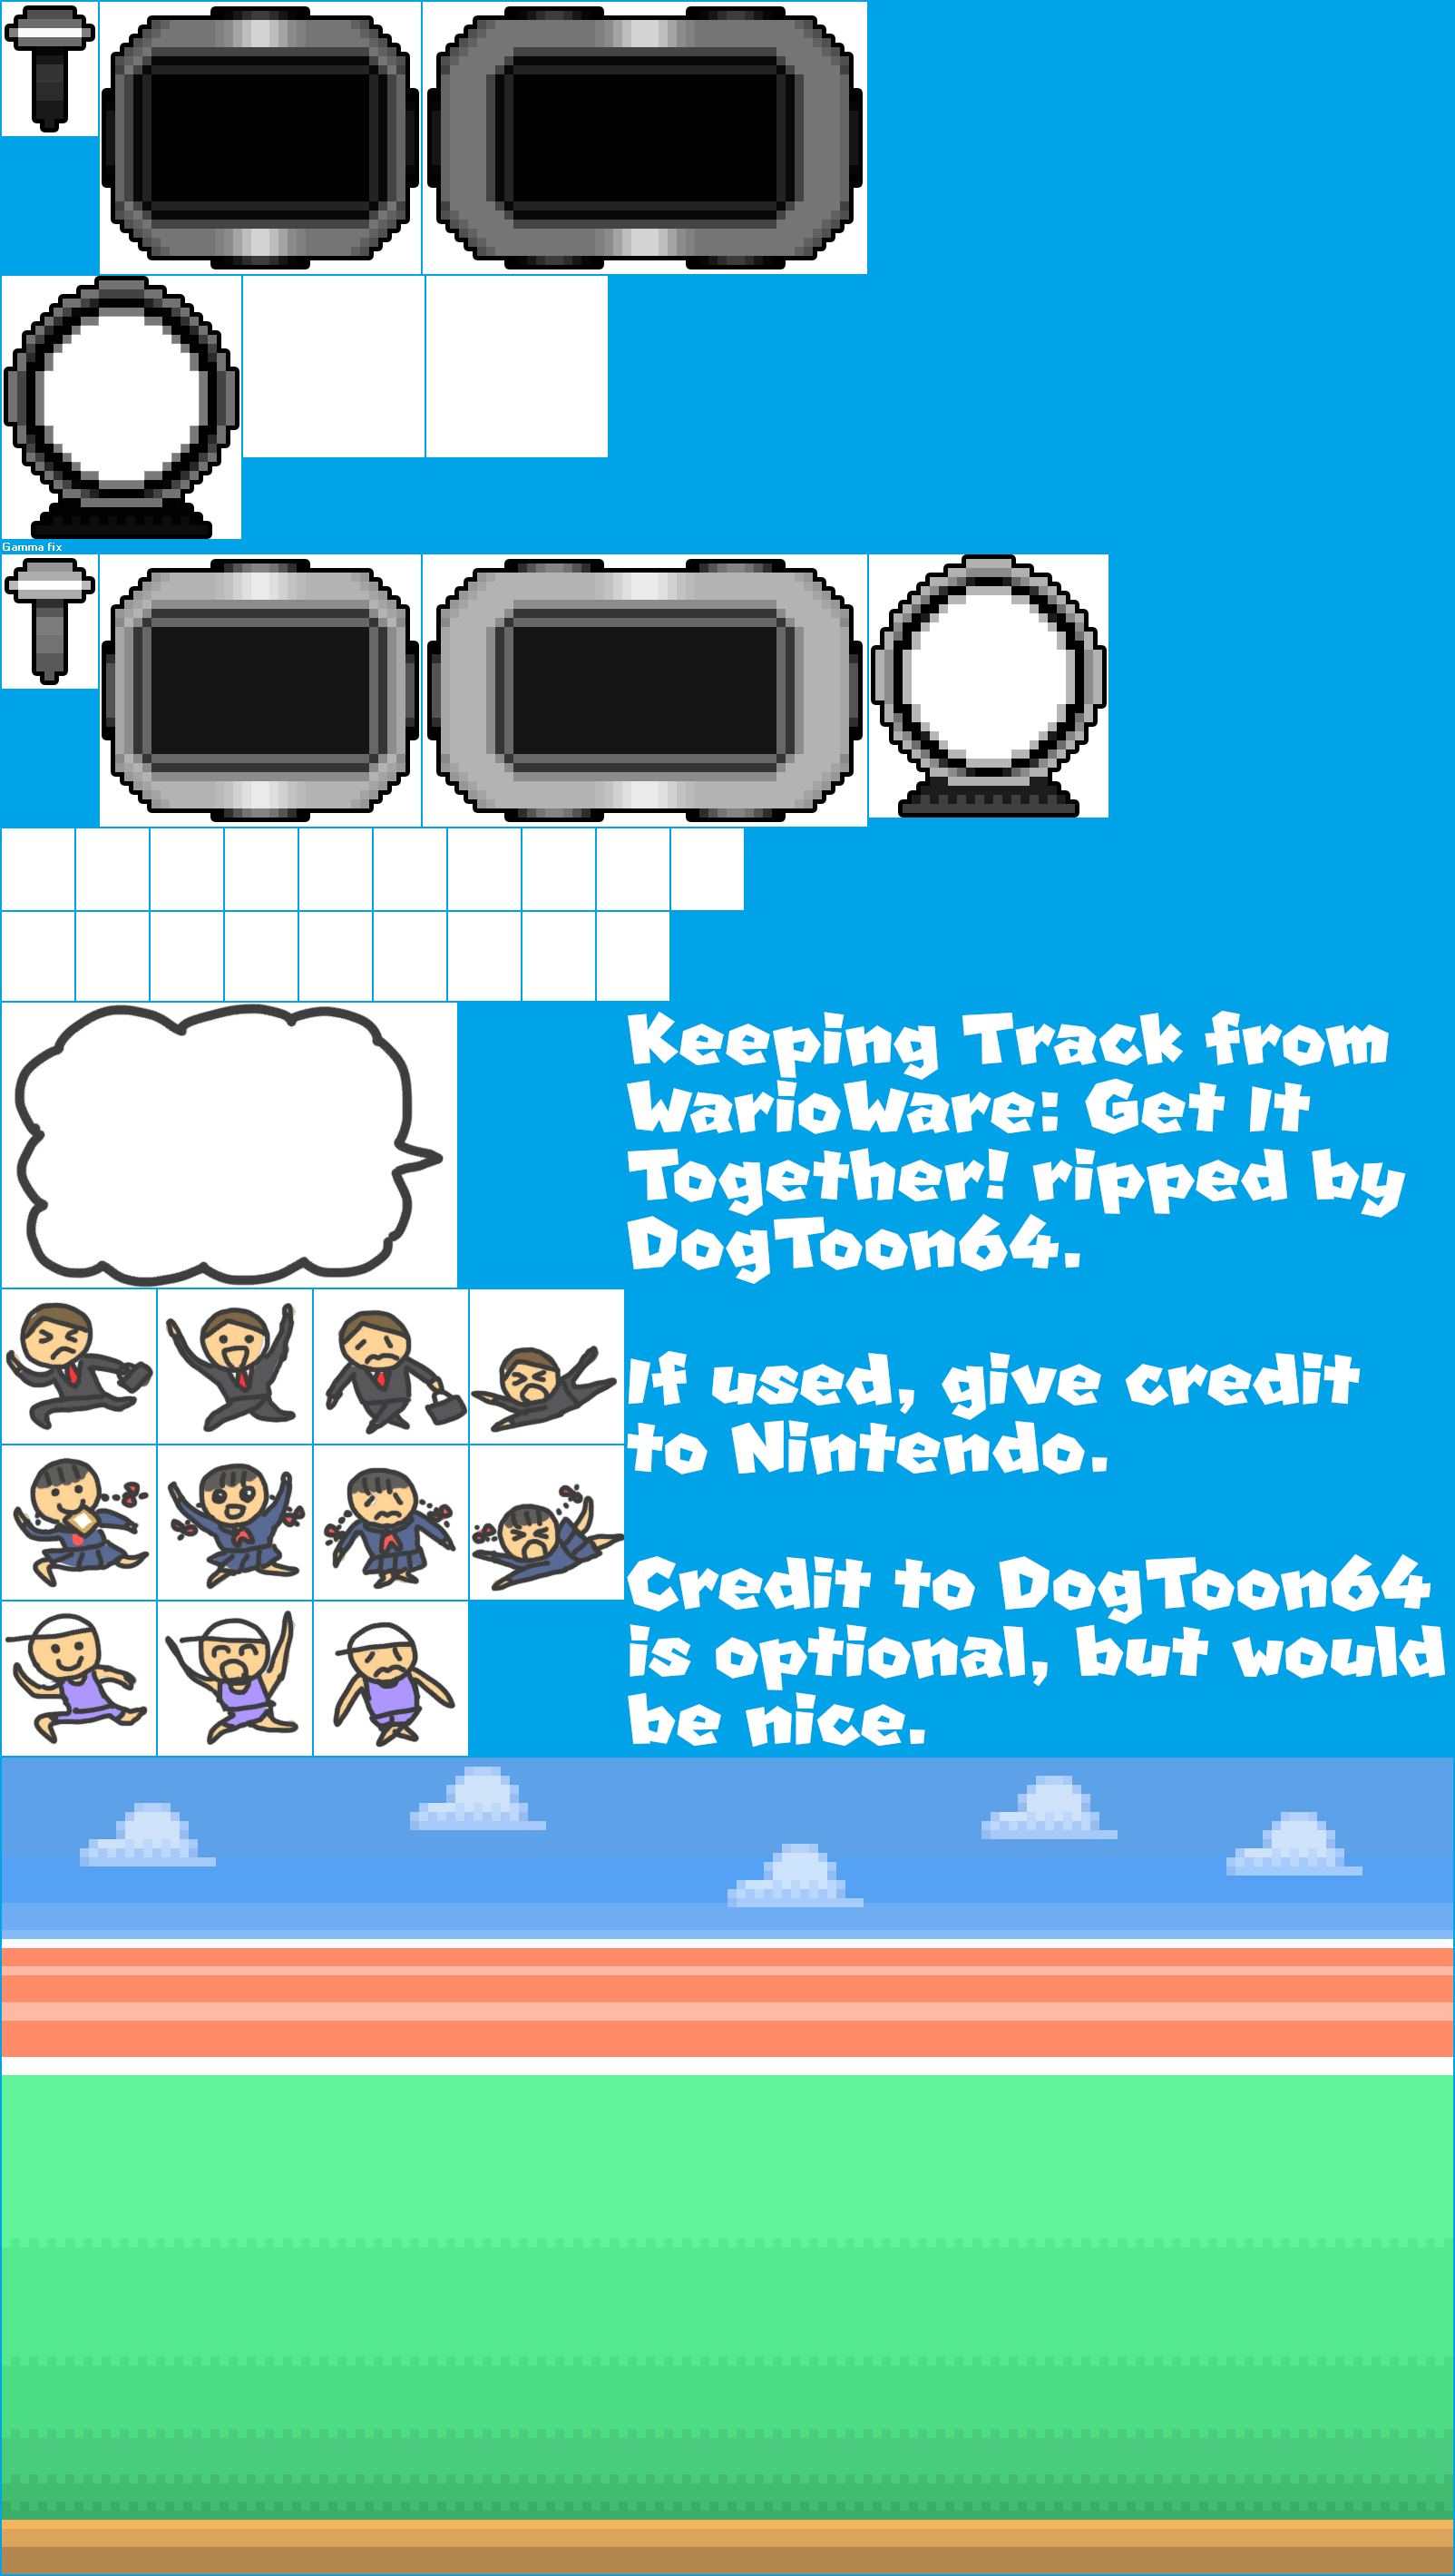 WarioWare: Get It Together! - Keeping Track